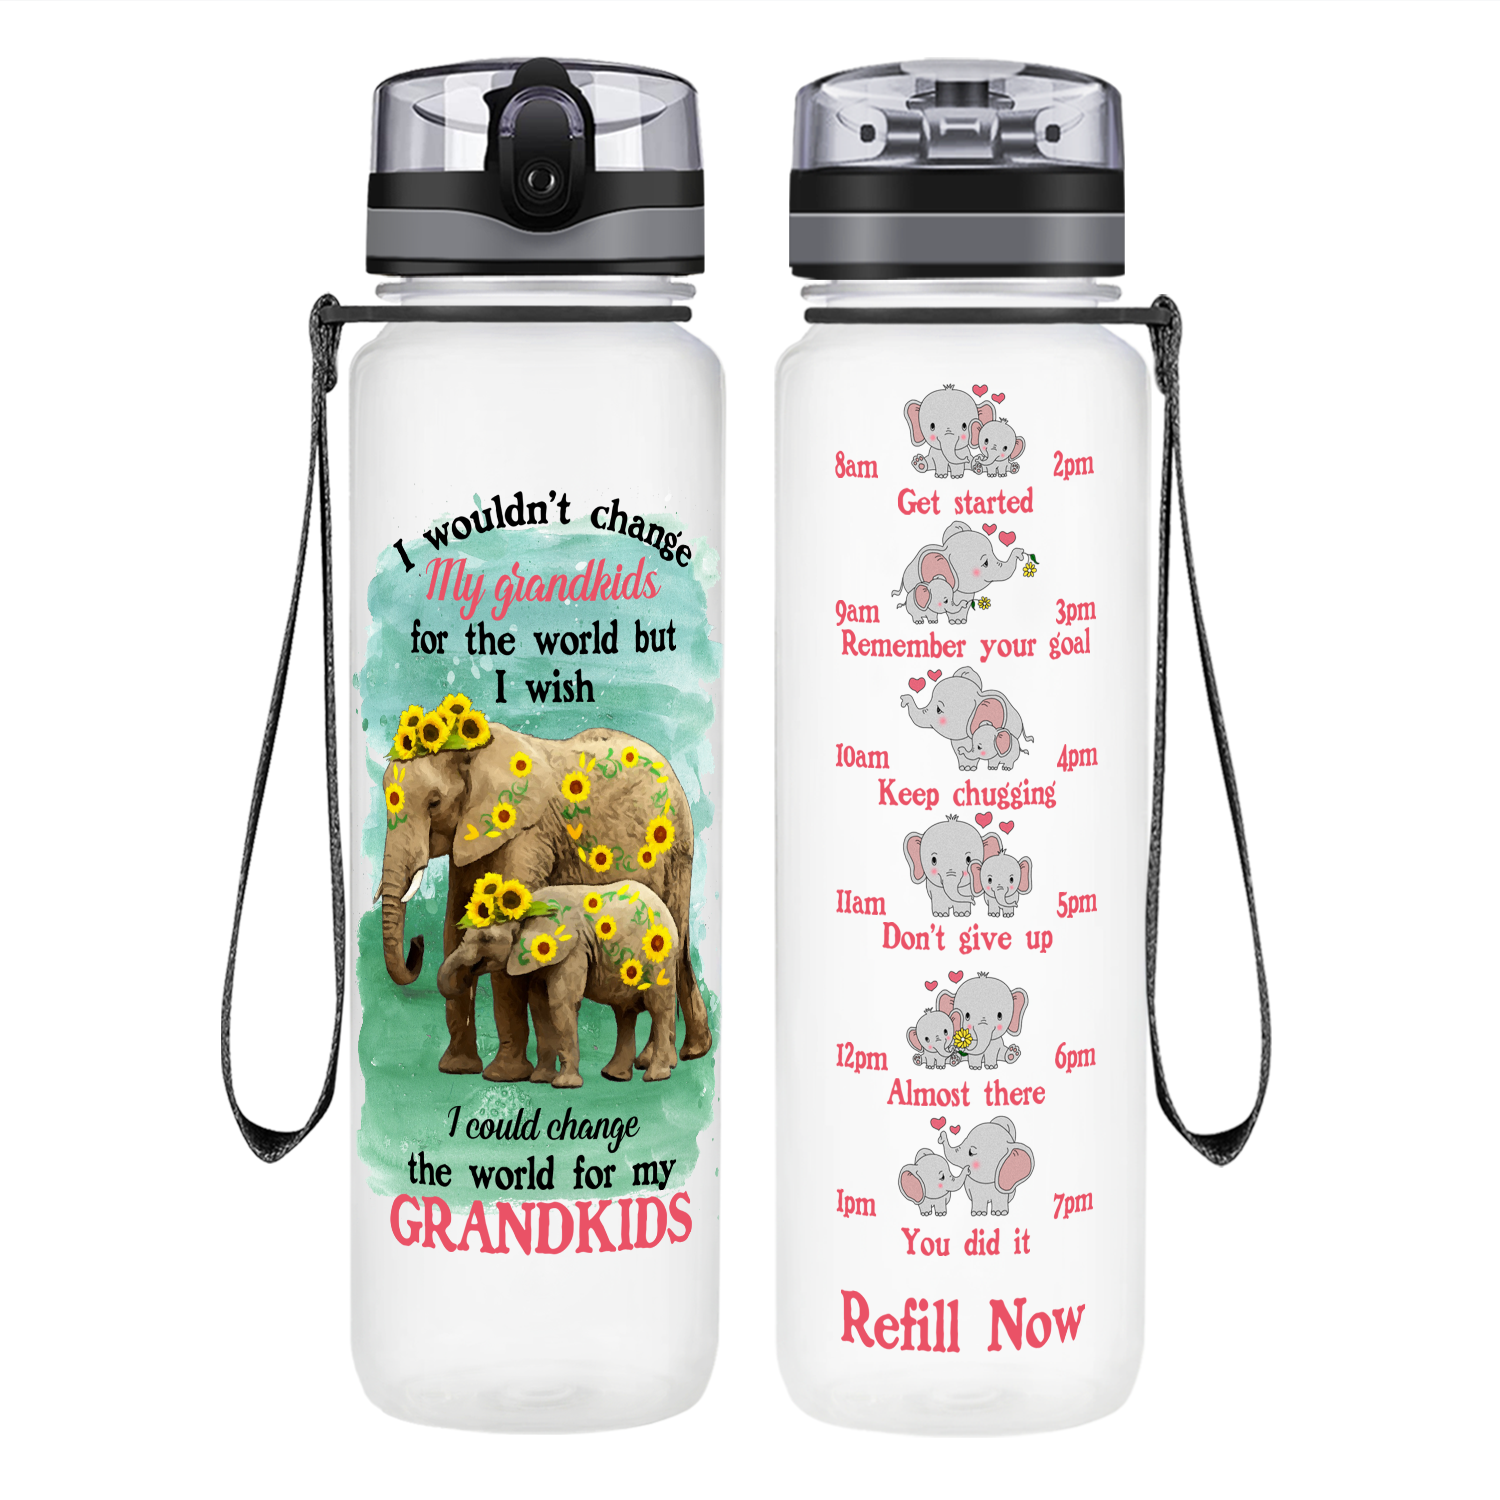 Change The World for My Grandkids on 32 oz Motivational Tracking Water Bottle